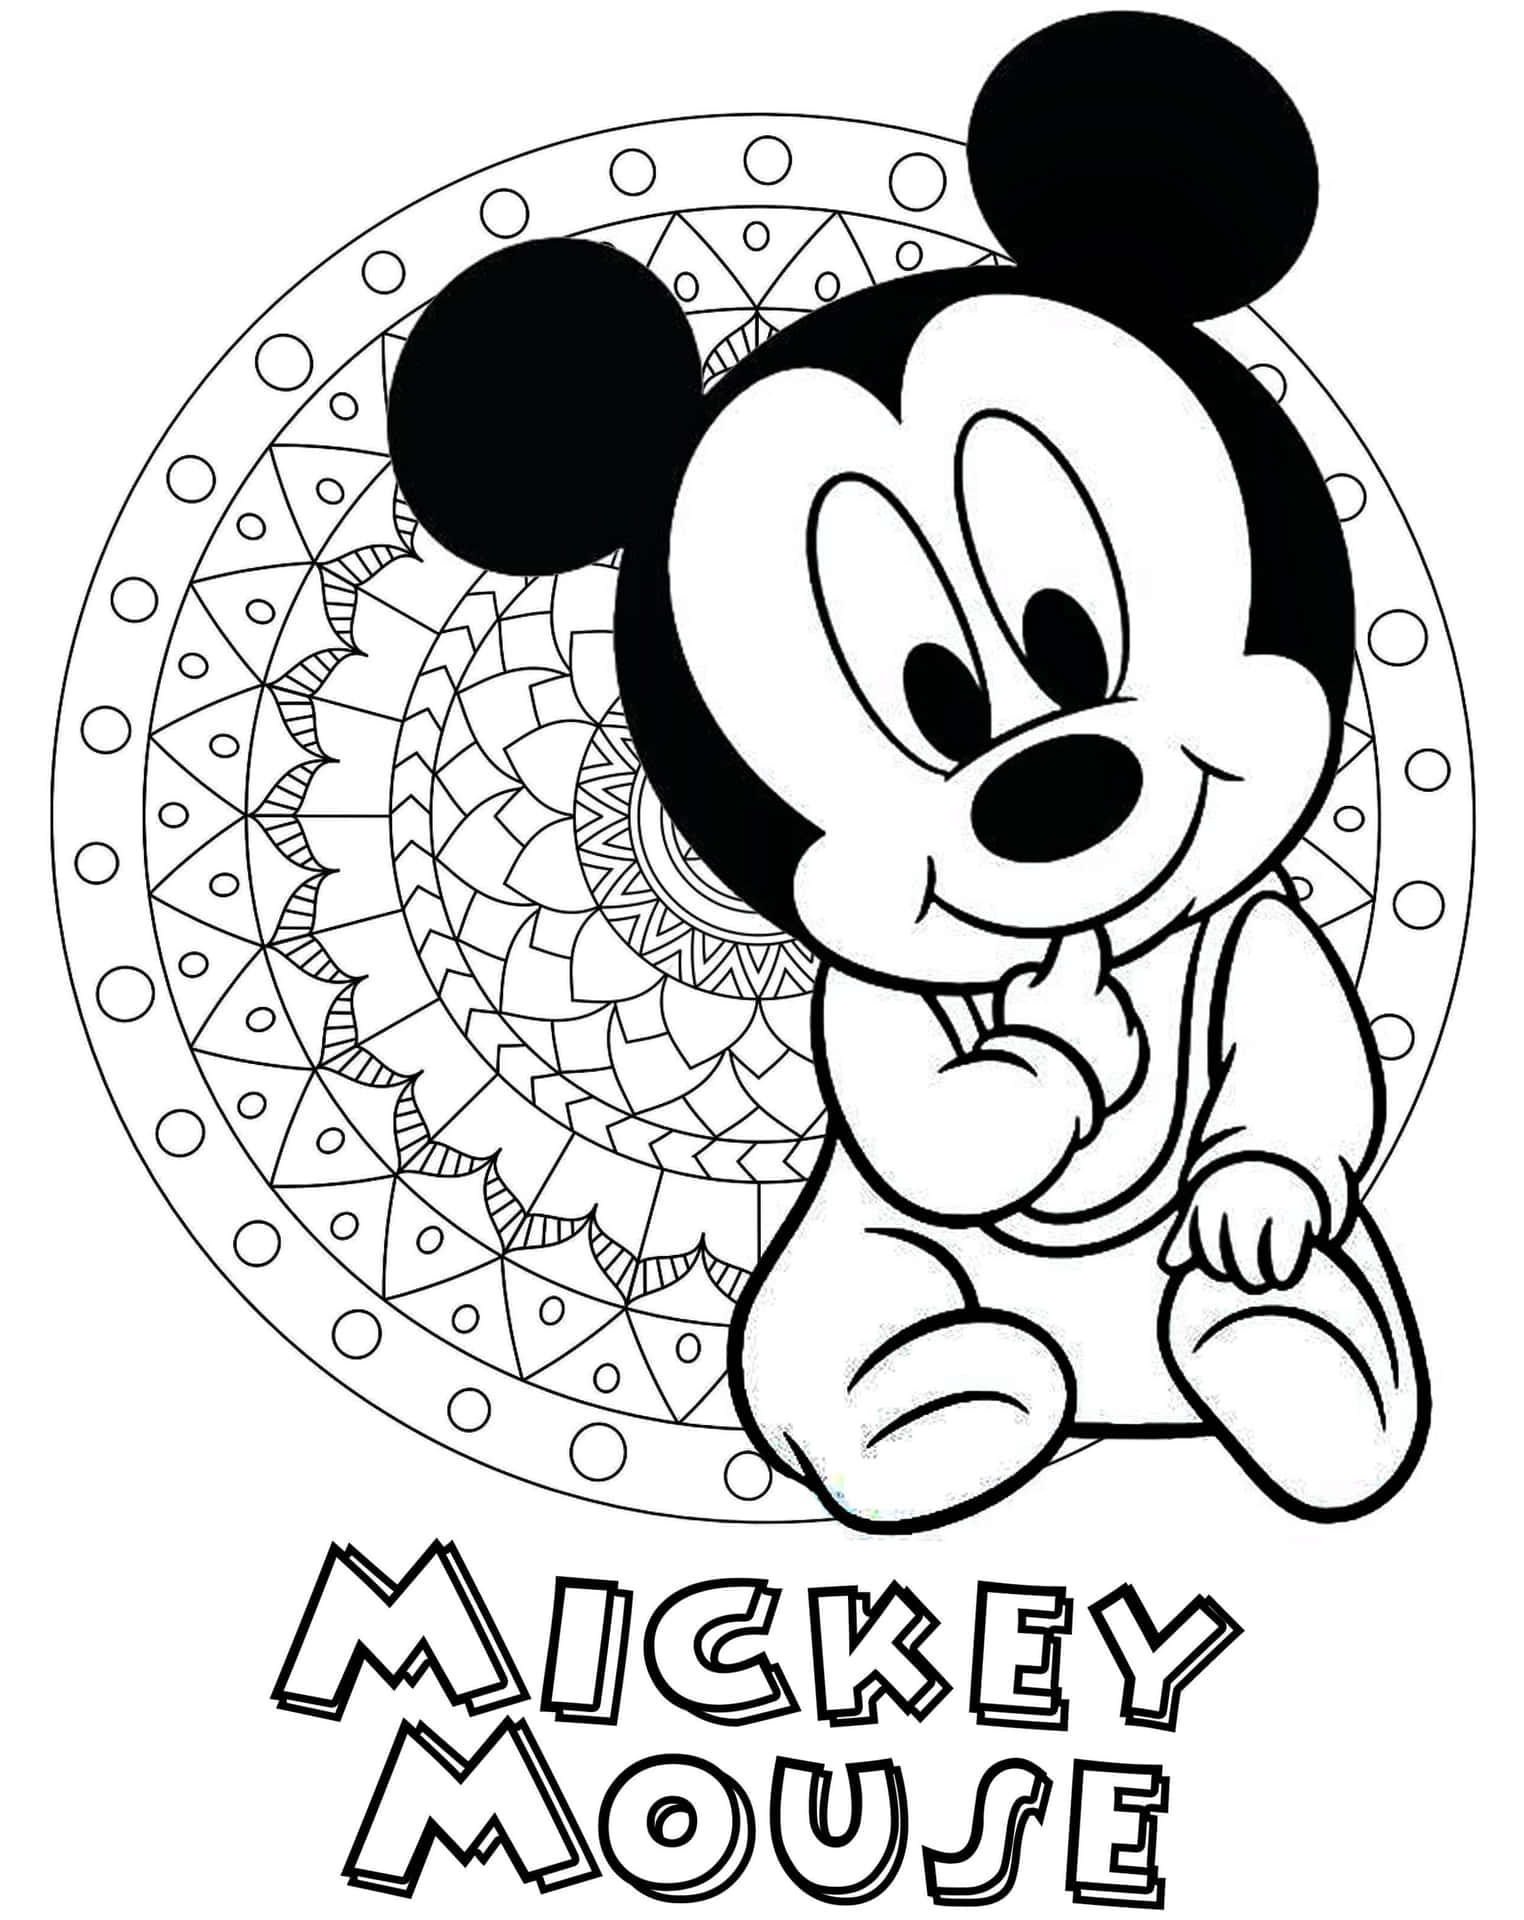 : Explore the world of Mickey Mouse with this fun and entertaining colouring page